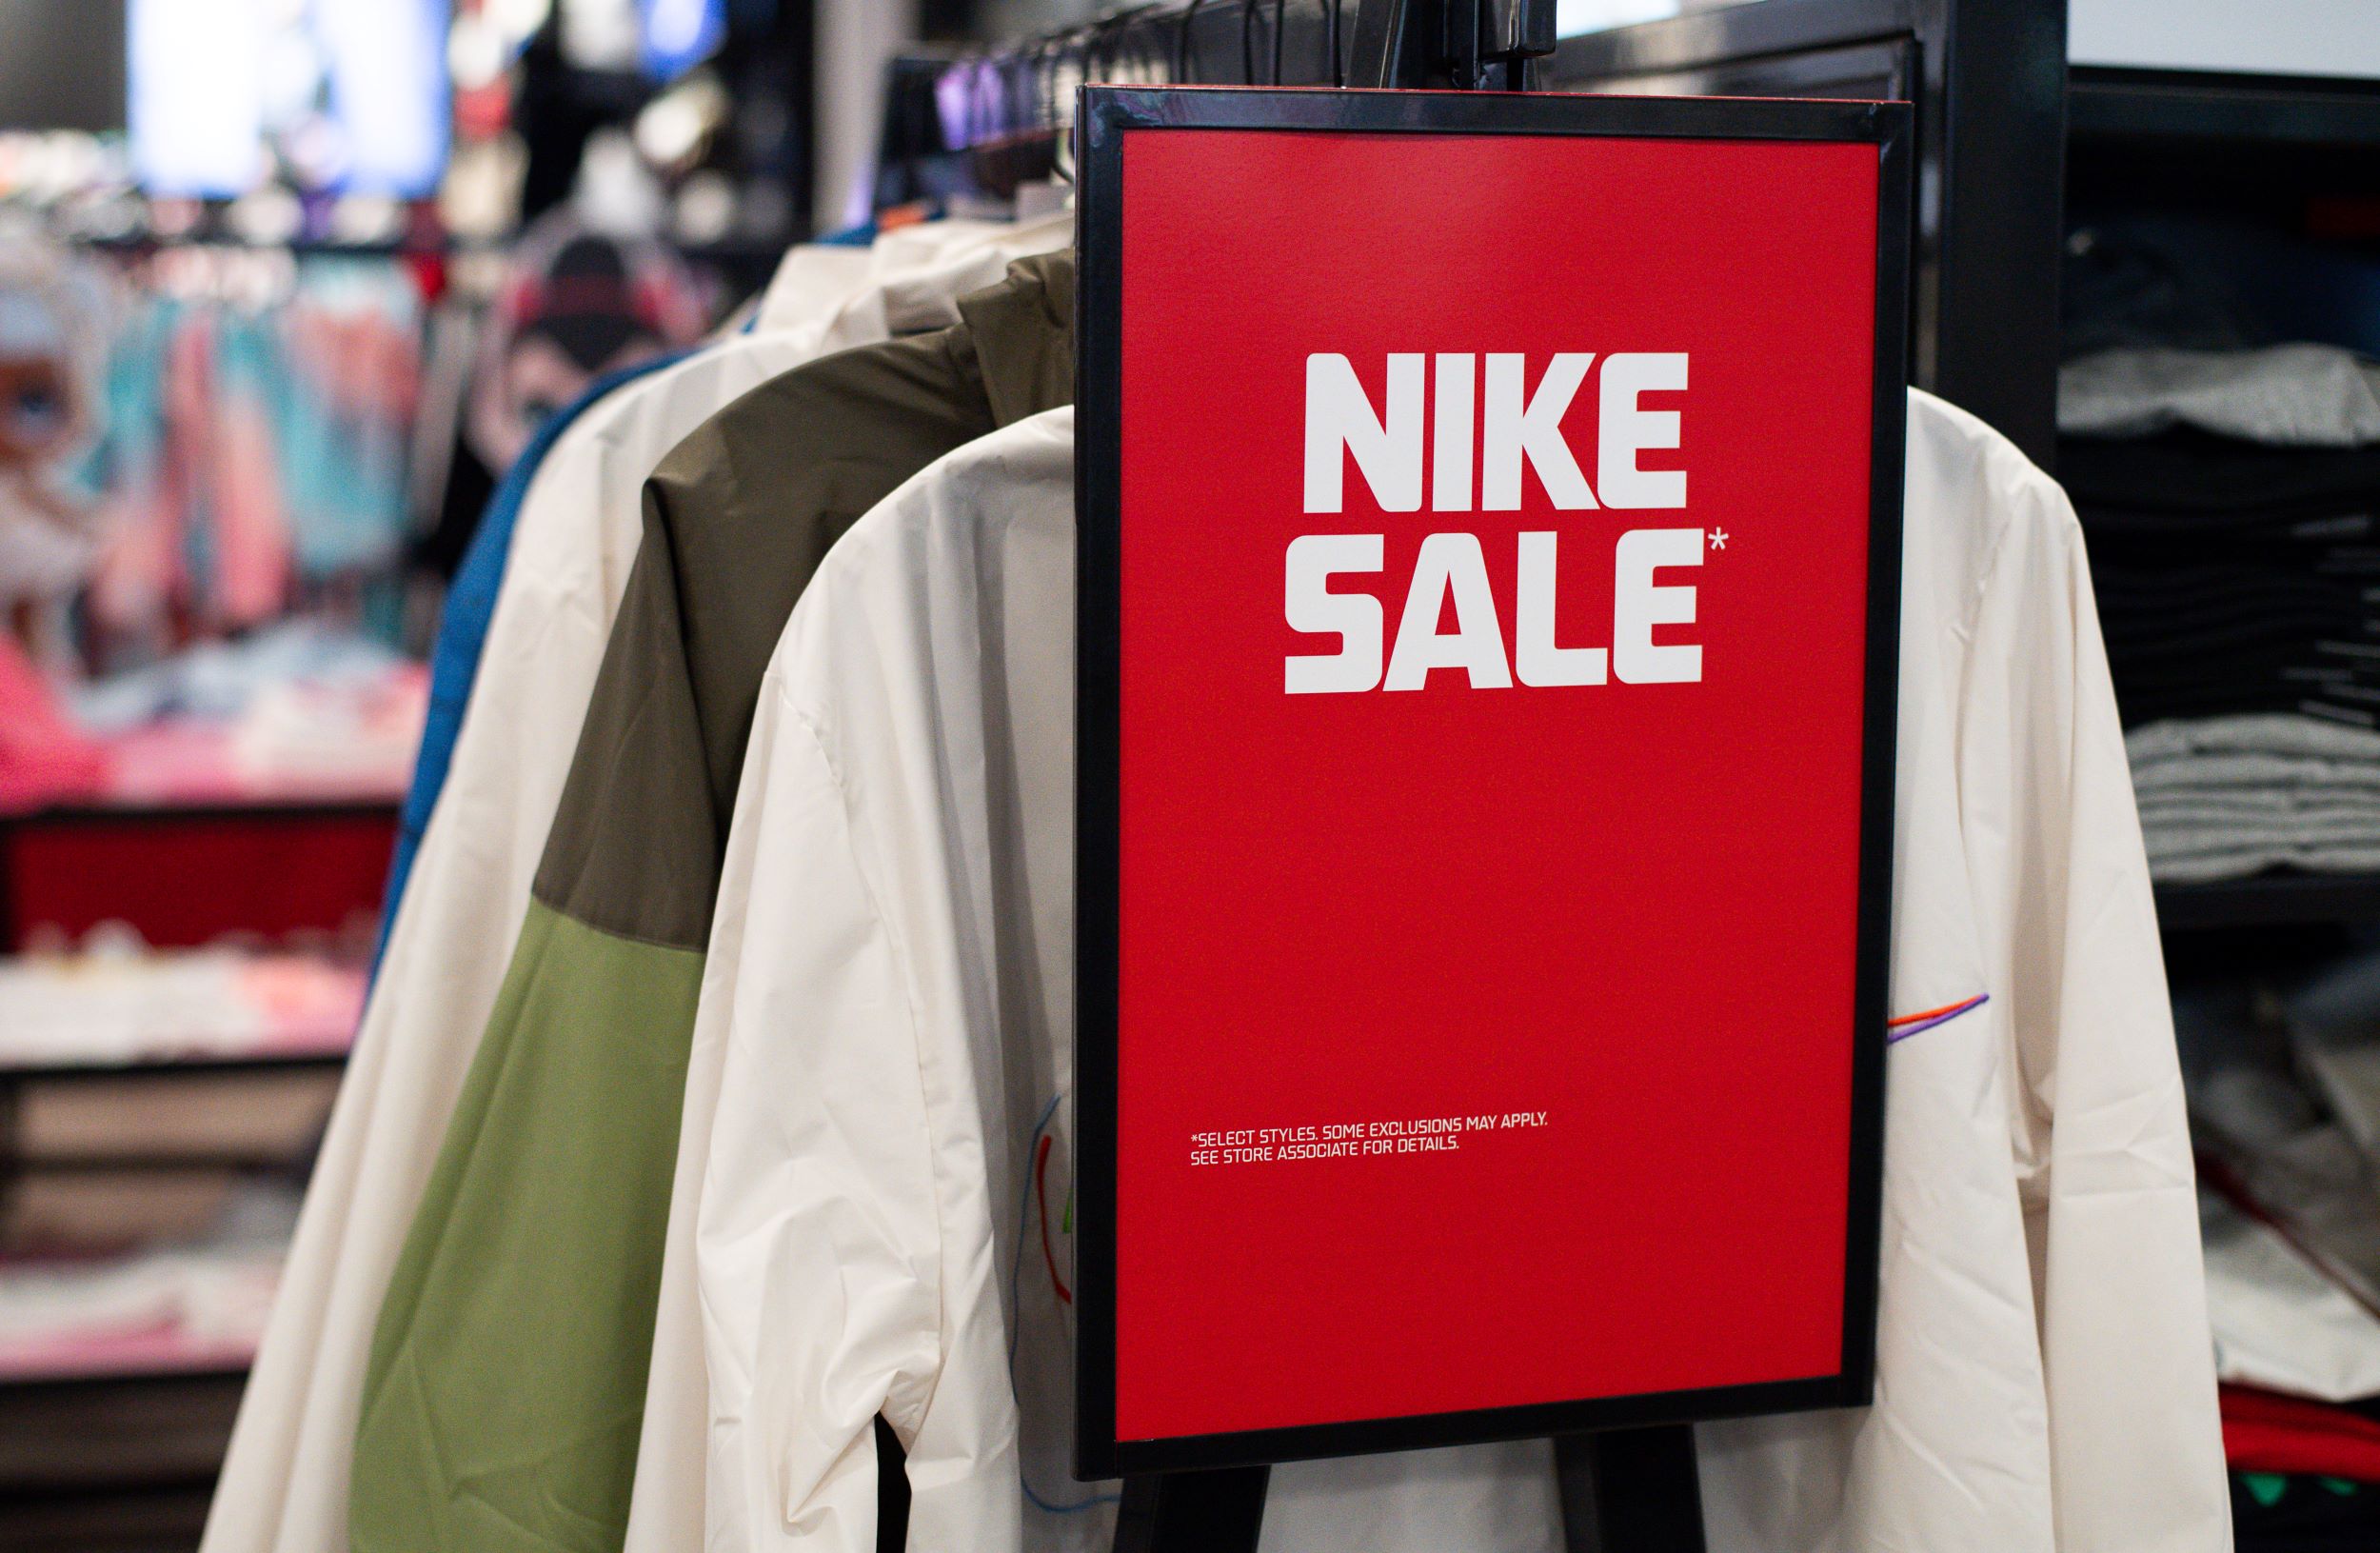 A red nike sale sign hanging in a clothing store surrounded by jackets on display.